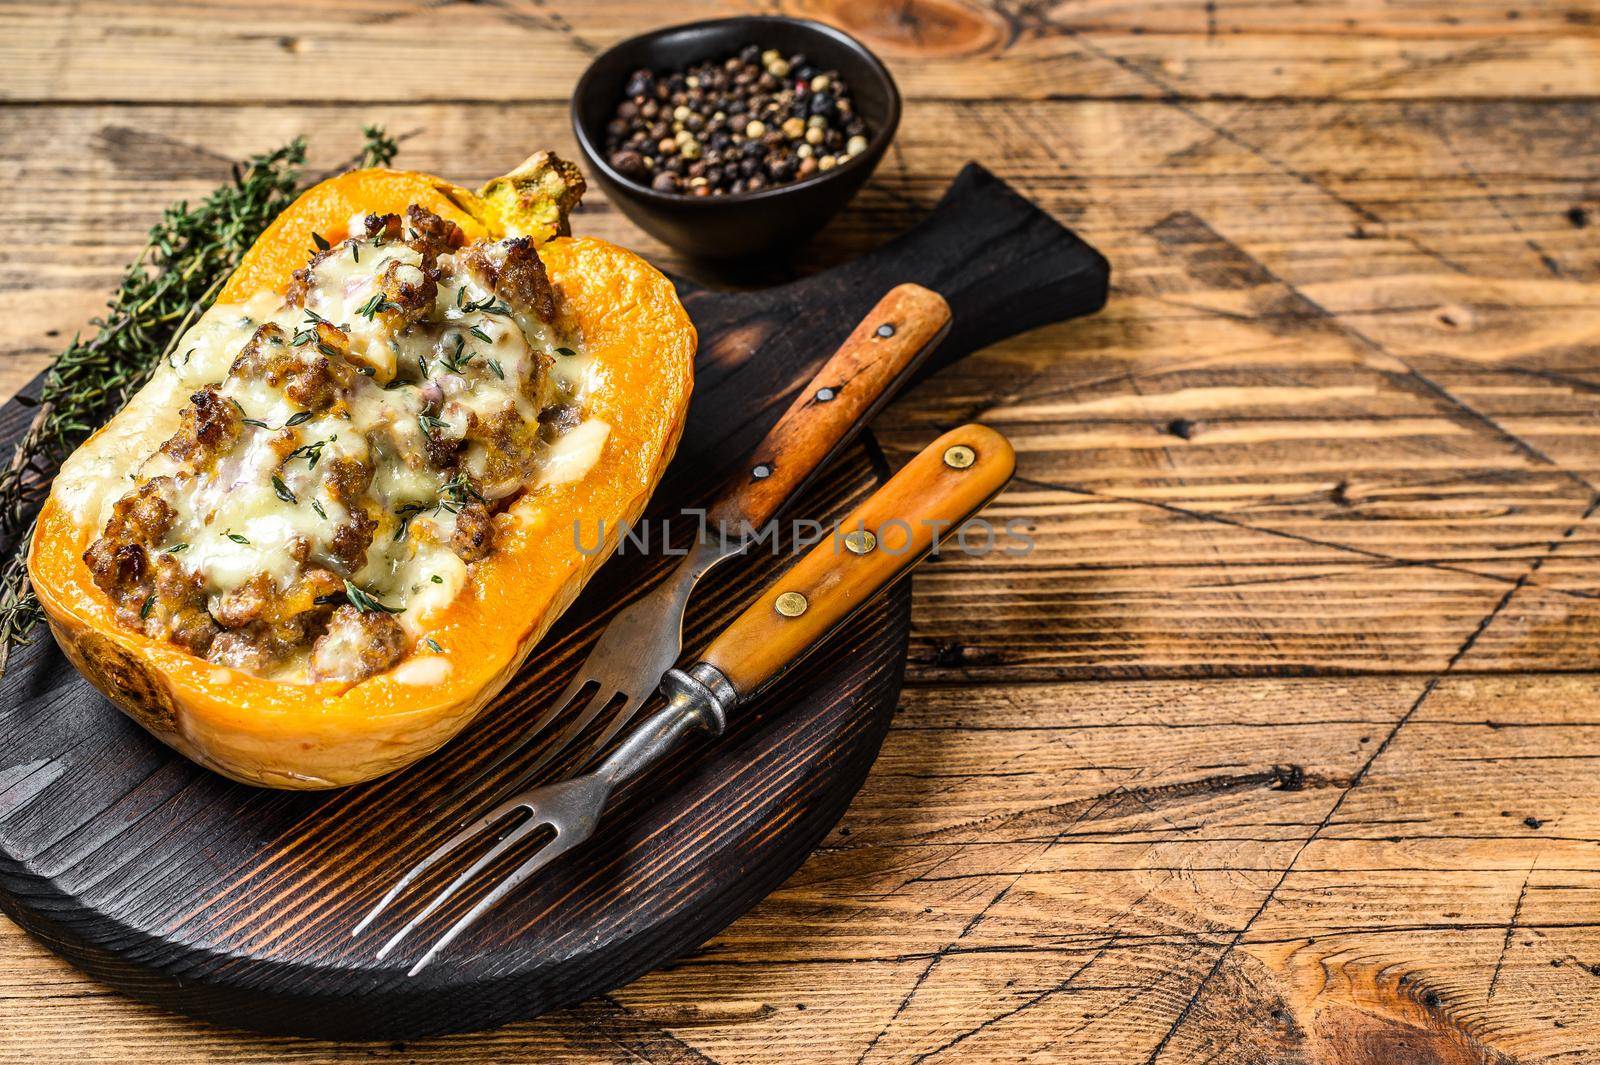 Cooked pumpkin stuffed with ground mince meat, vegetables and herbs. wooden background. Top view. Copy space.